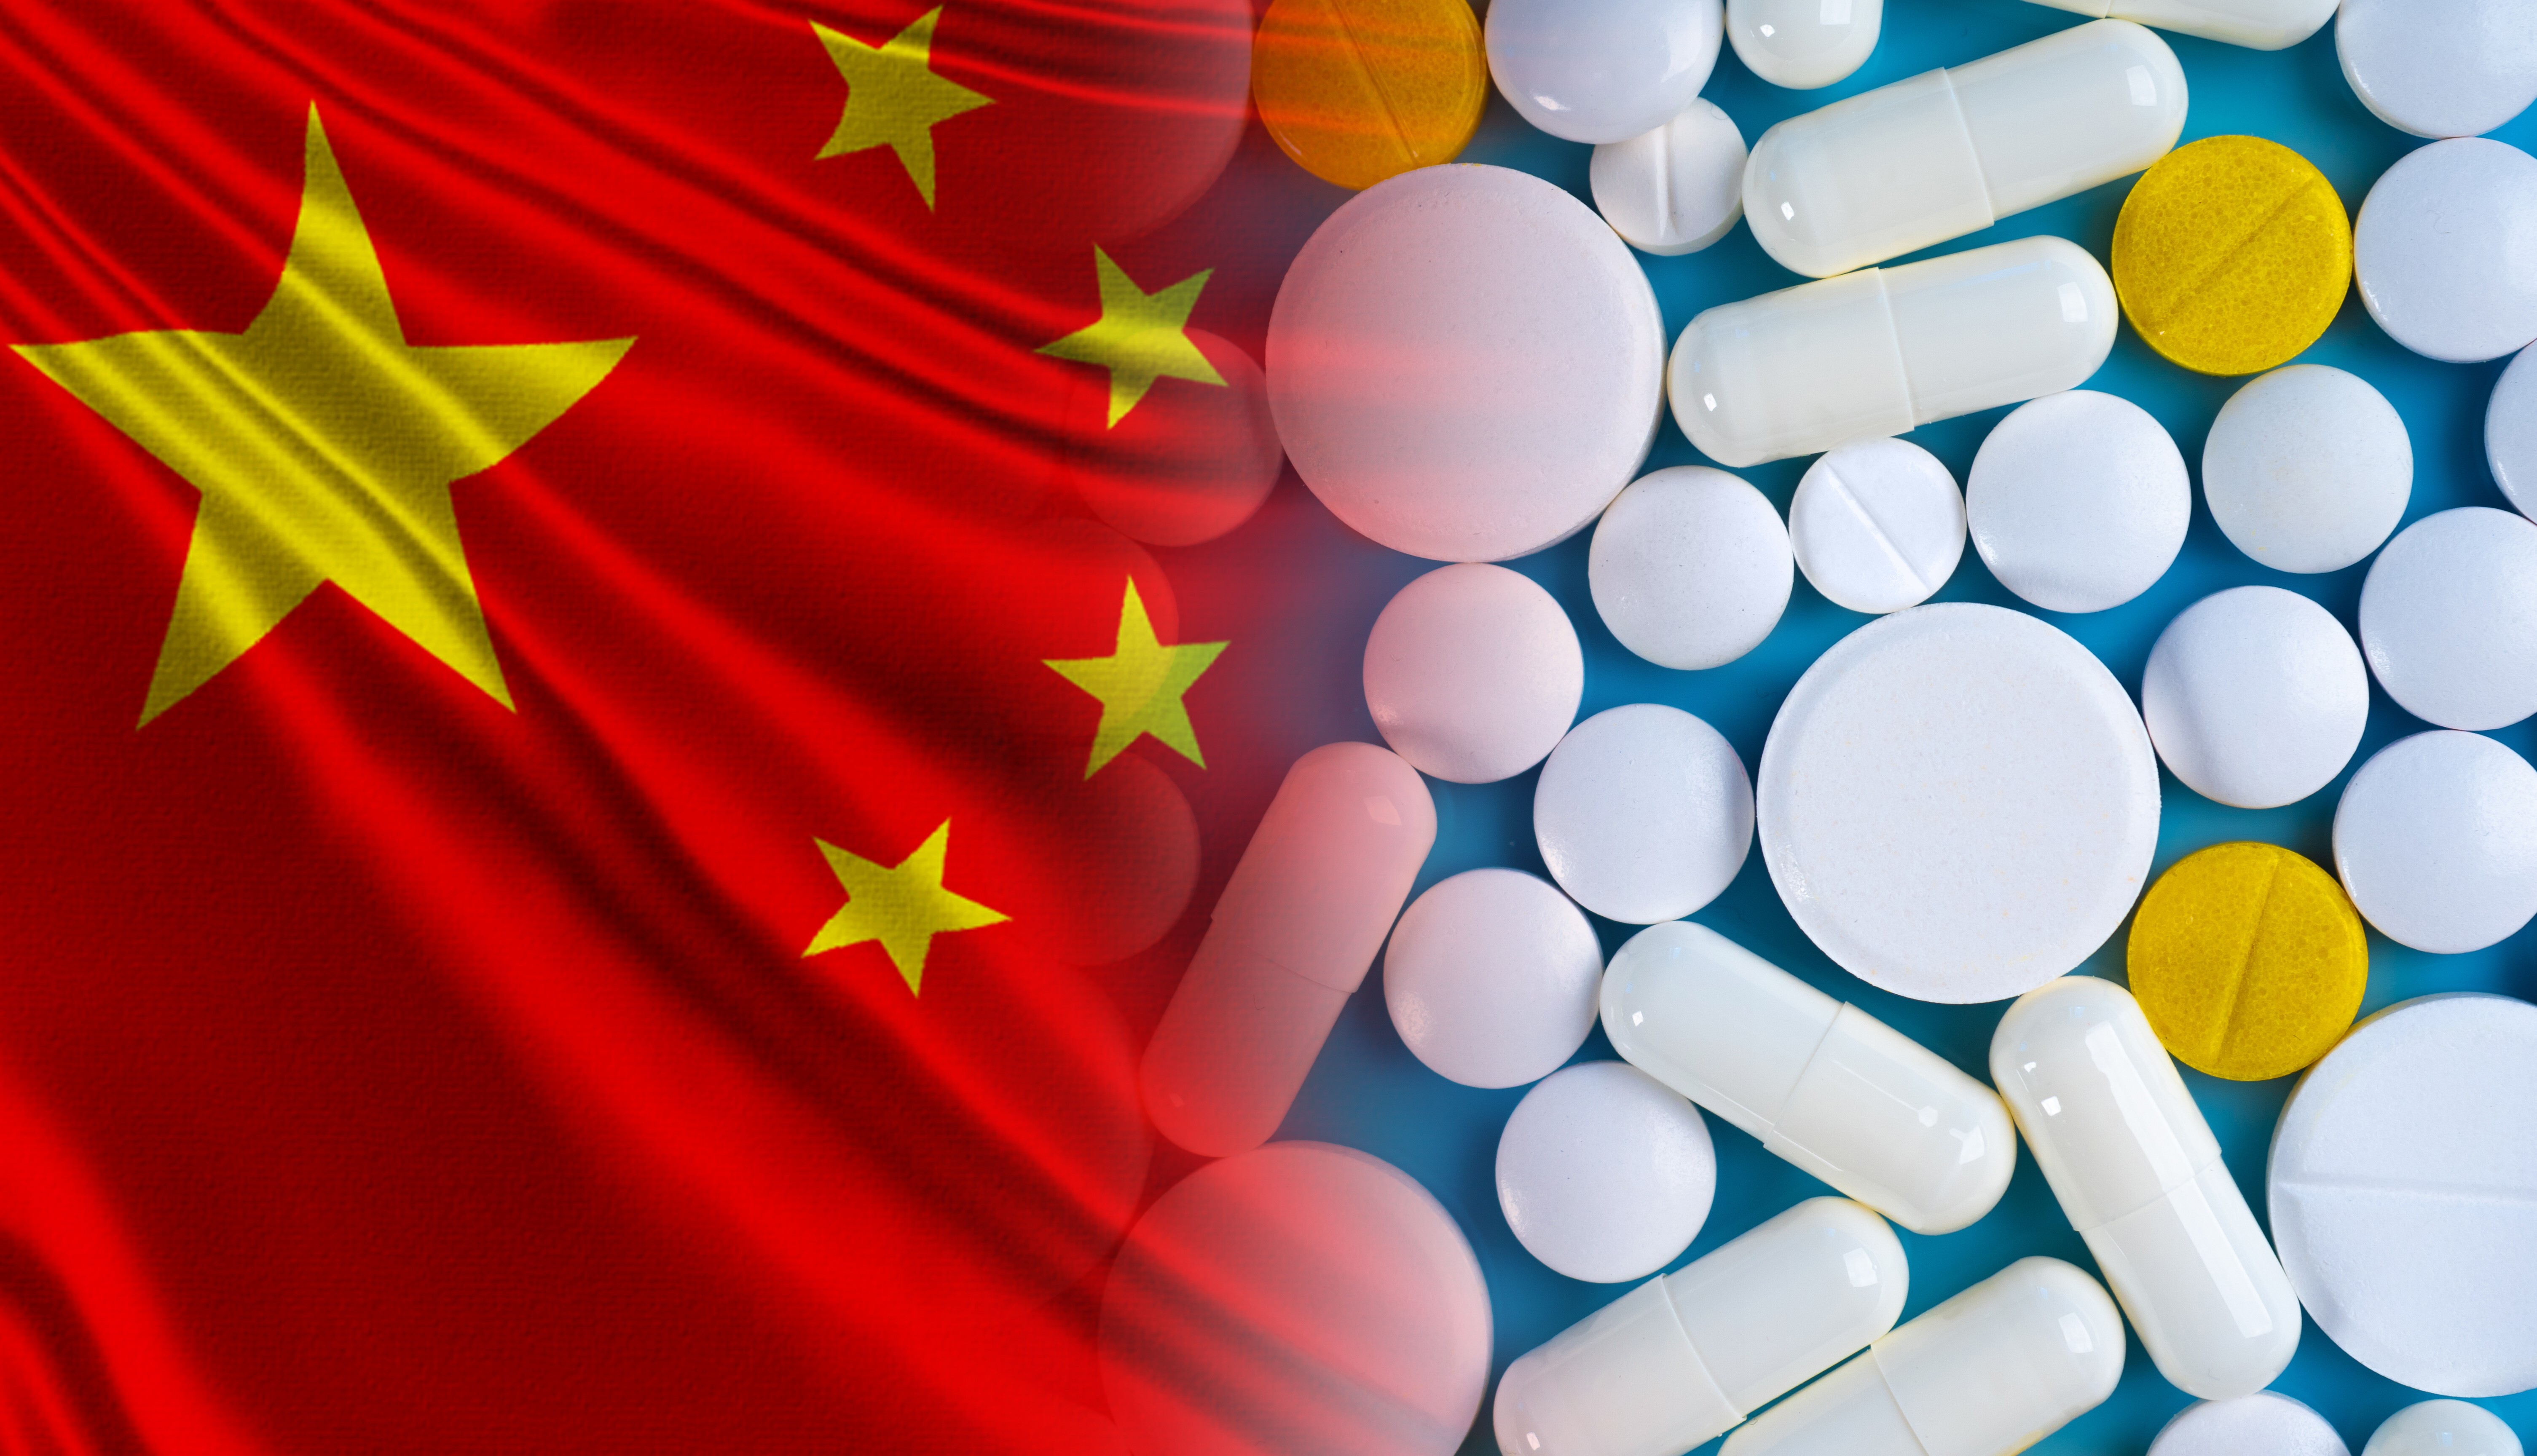 Chinese health care stocks have outperformed global peers in 2020 and this year, according to MSCI Indexes. Photo: Shutterstock Images